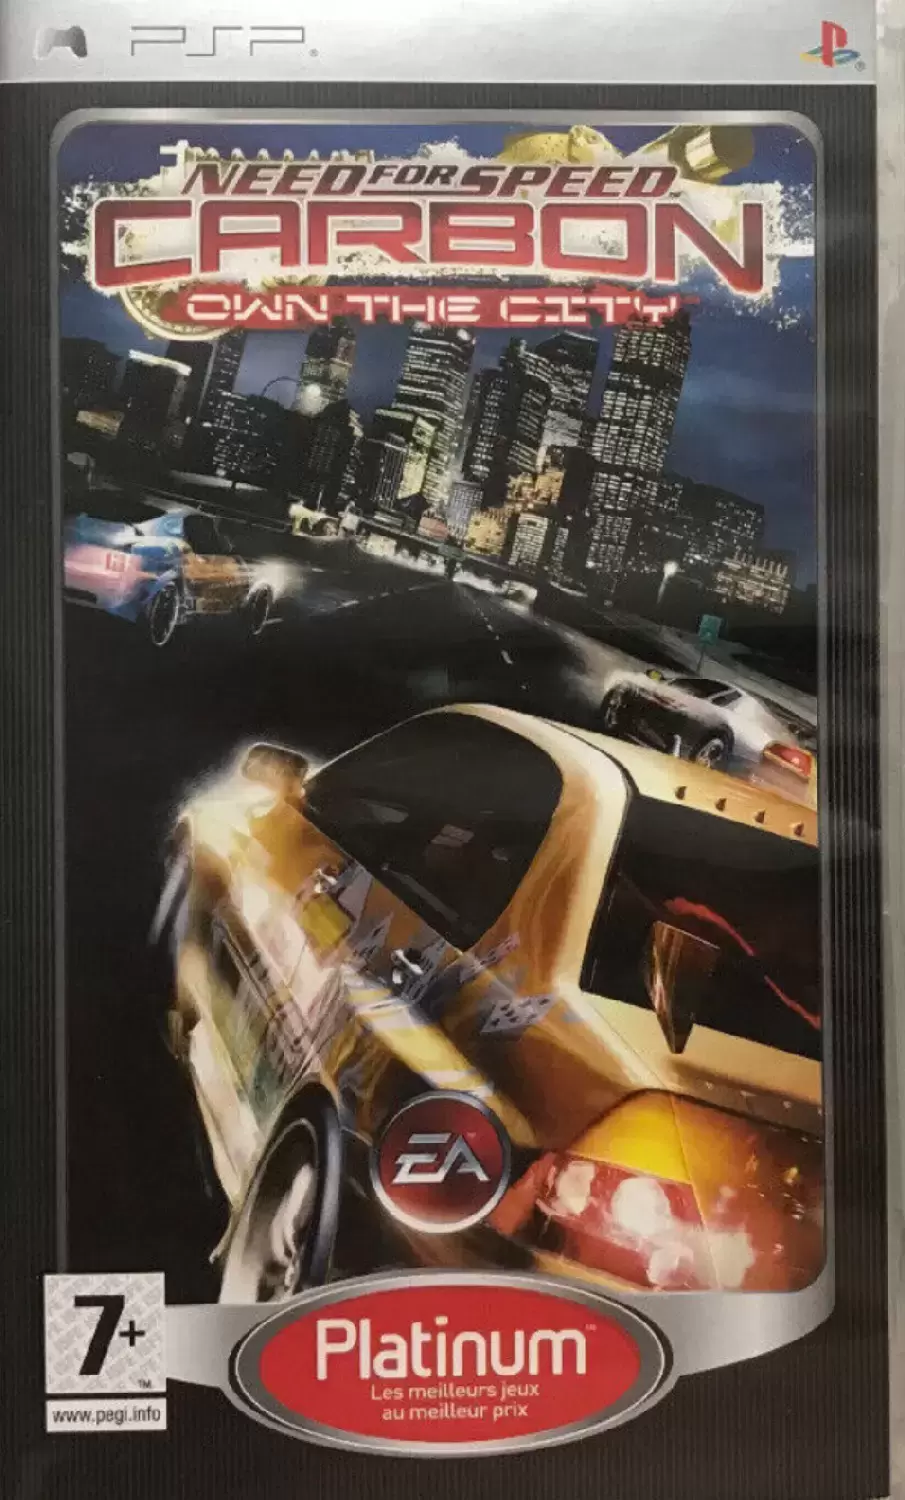 PSP Games - Need For Speed Carbon Own The City - Platinium